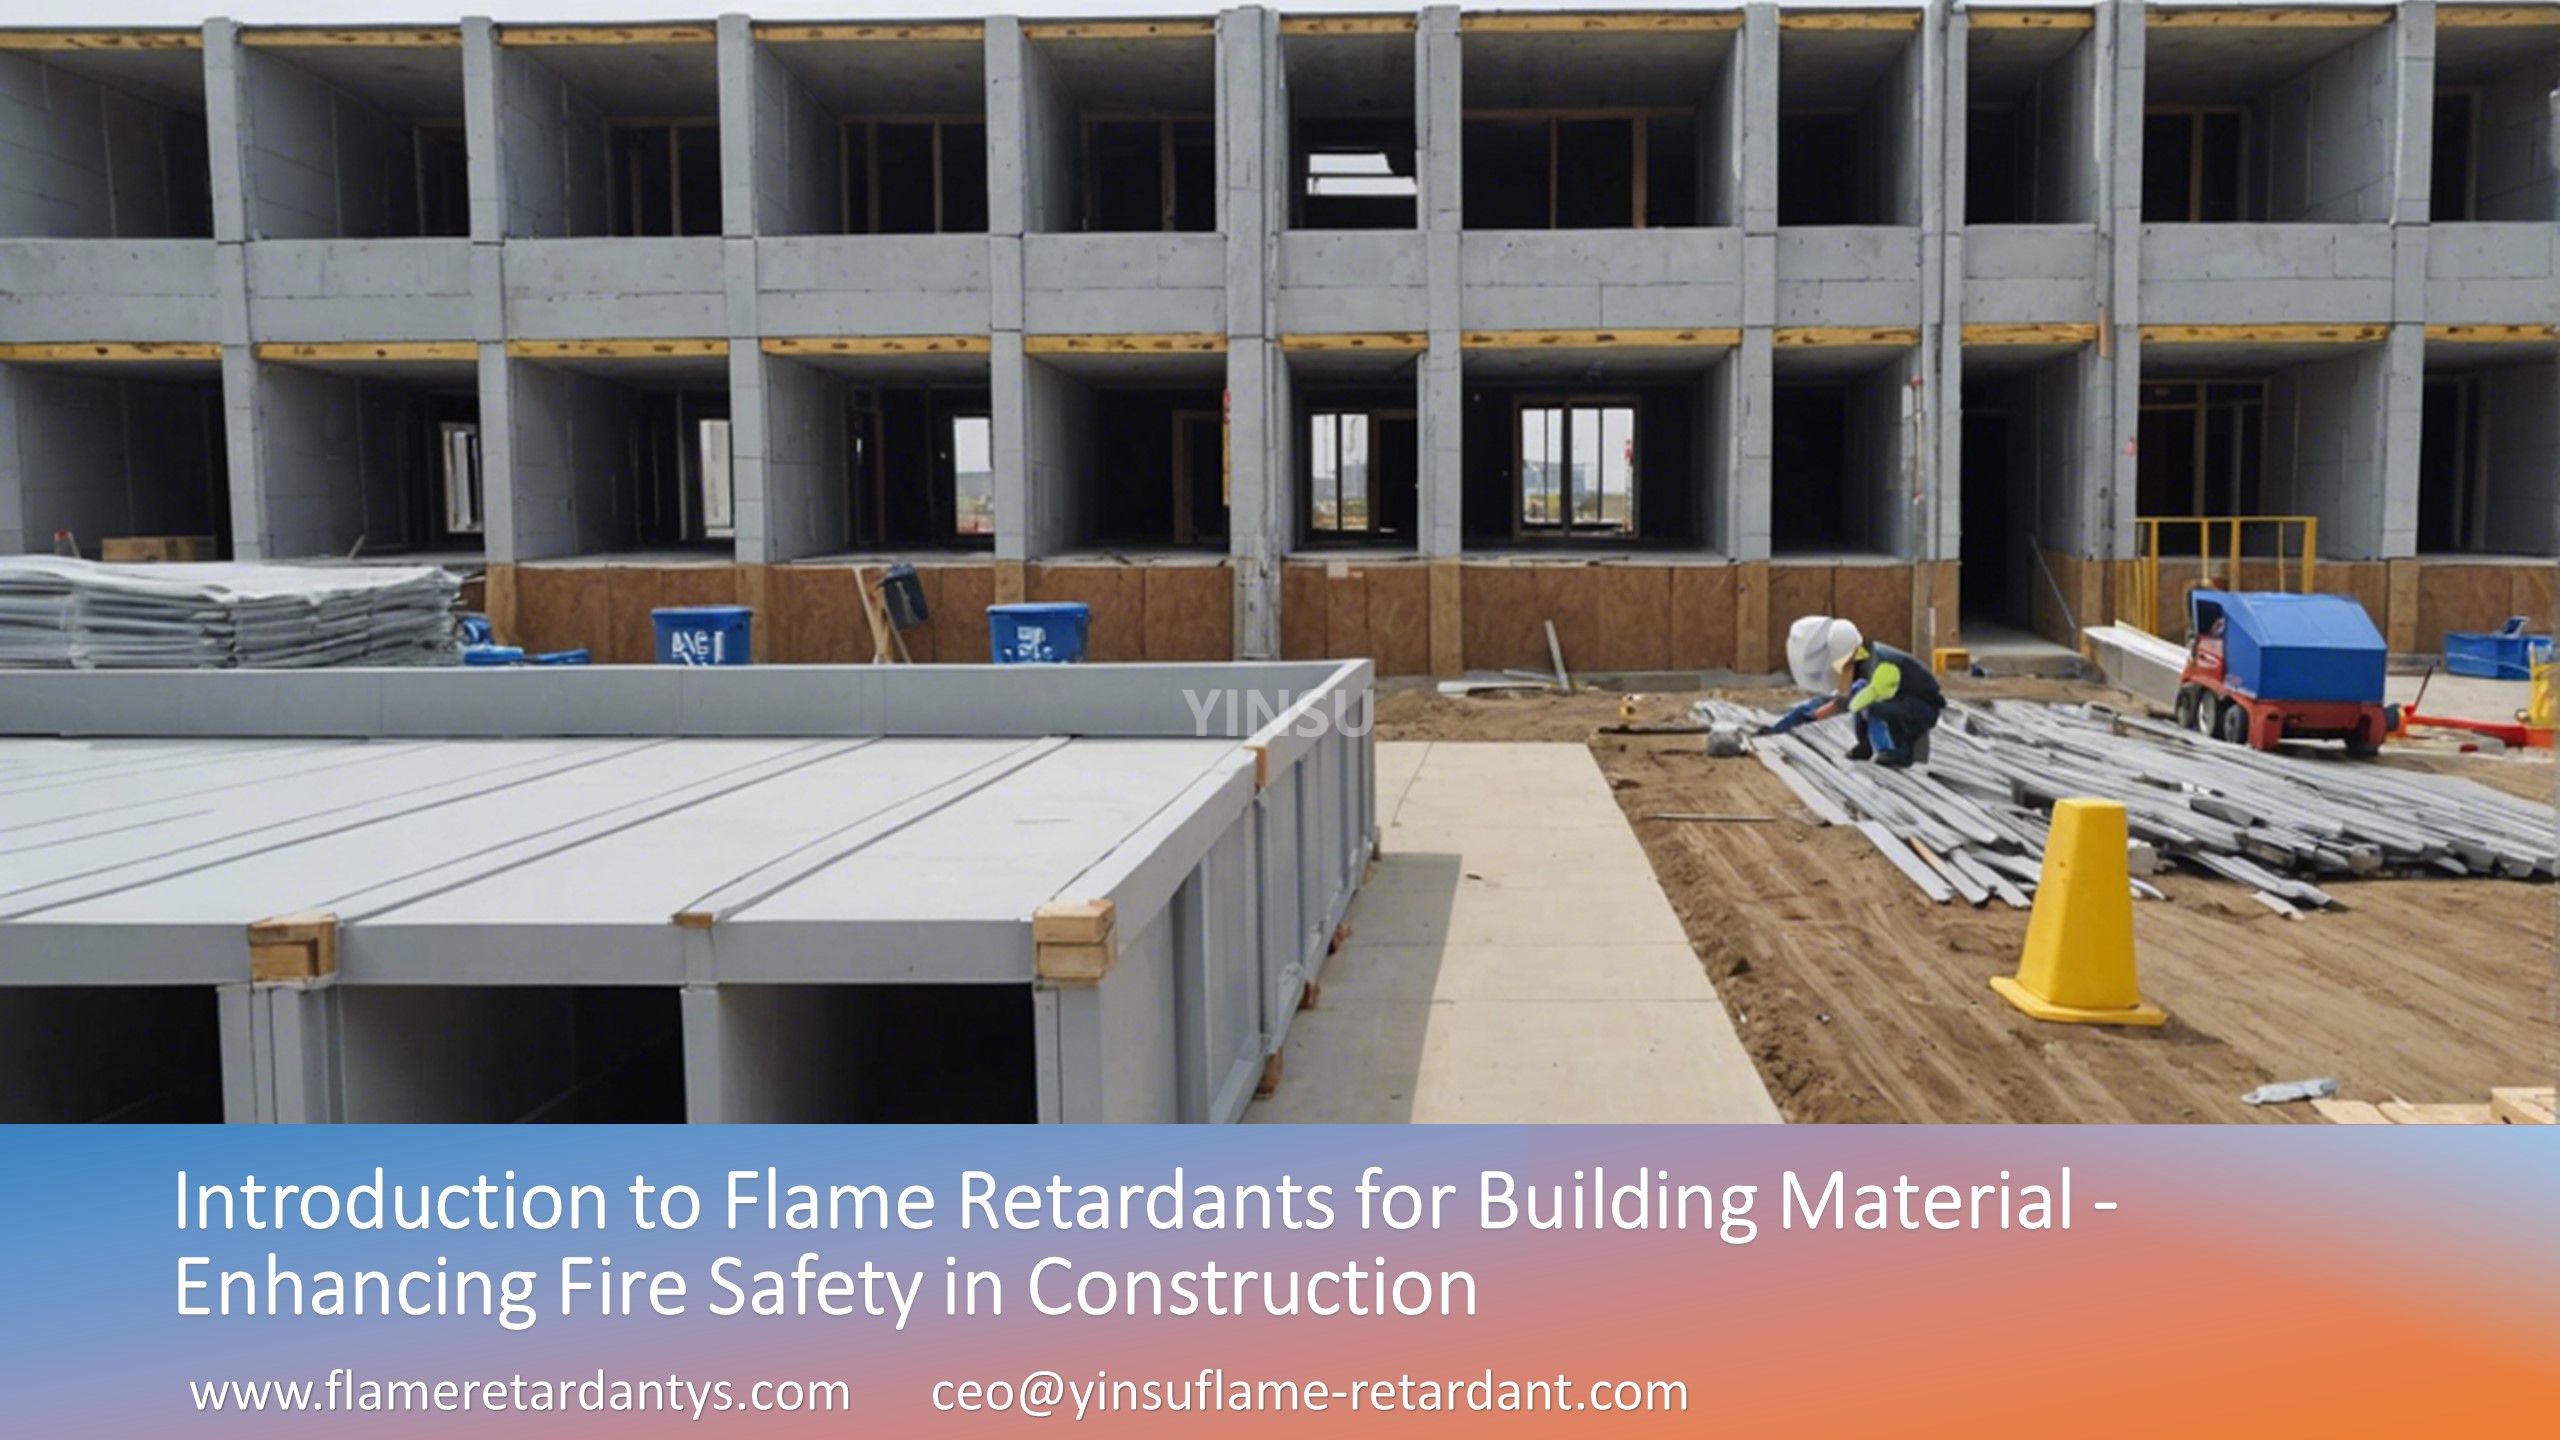 8.11 Introduction to Flame Retardants for Building Material - Enhancing Fire Safety in Construction